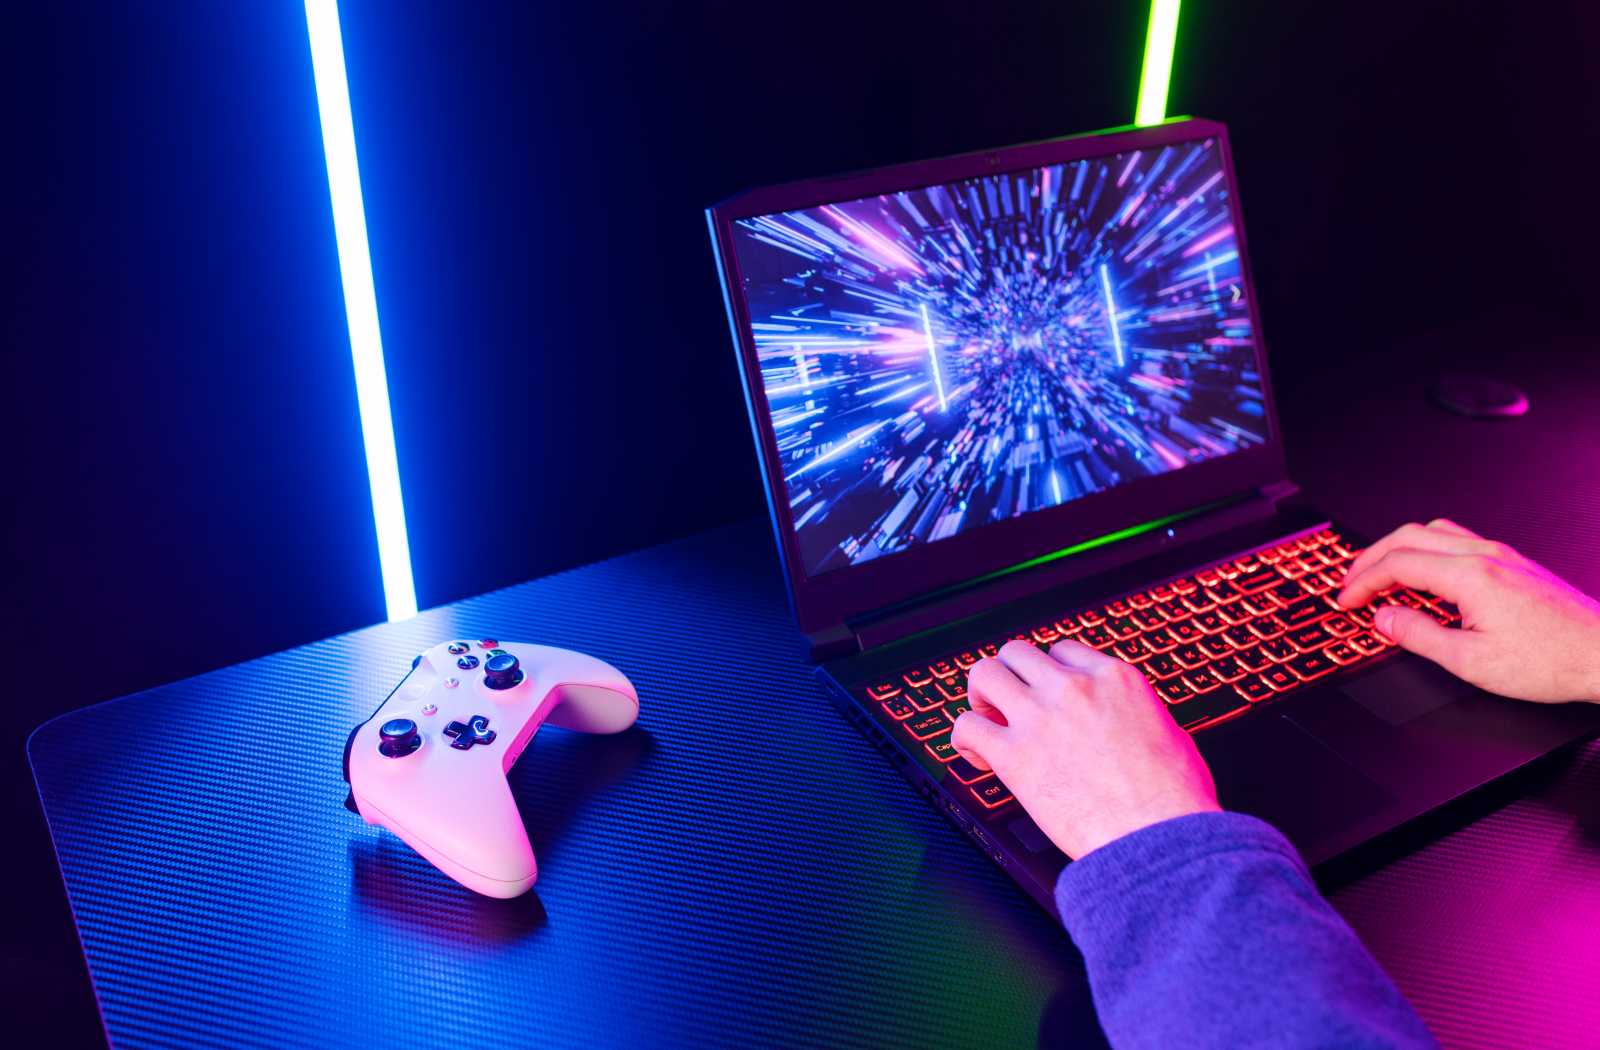 hp gaming laptops are the next big trend